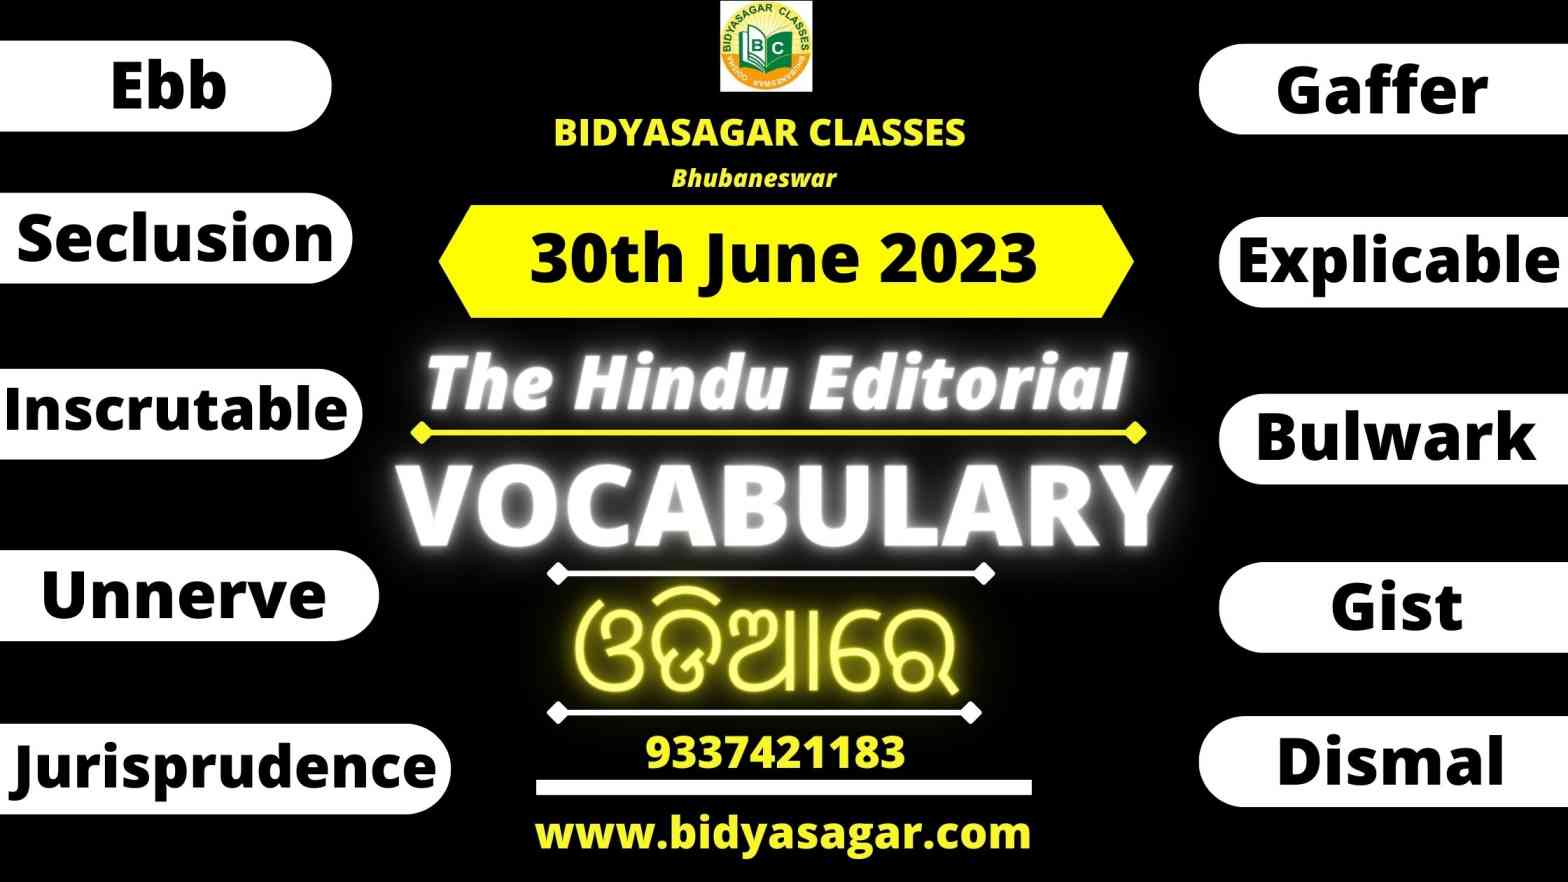 The Hindu Editorial Vocabulary of 30th June 2023